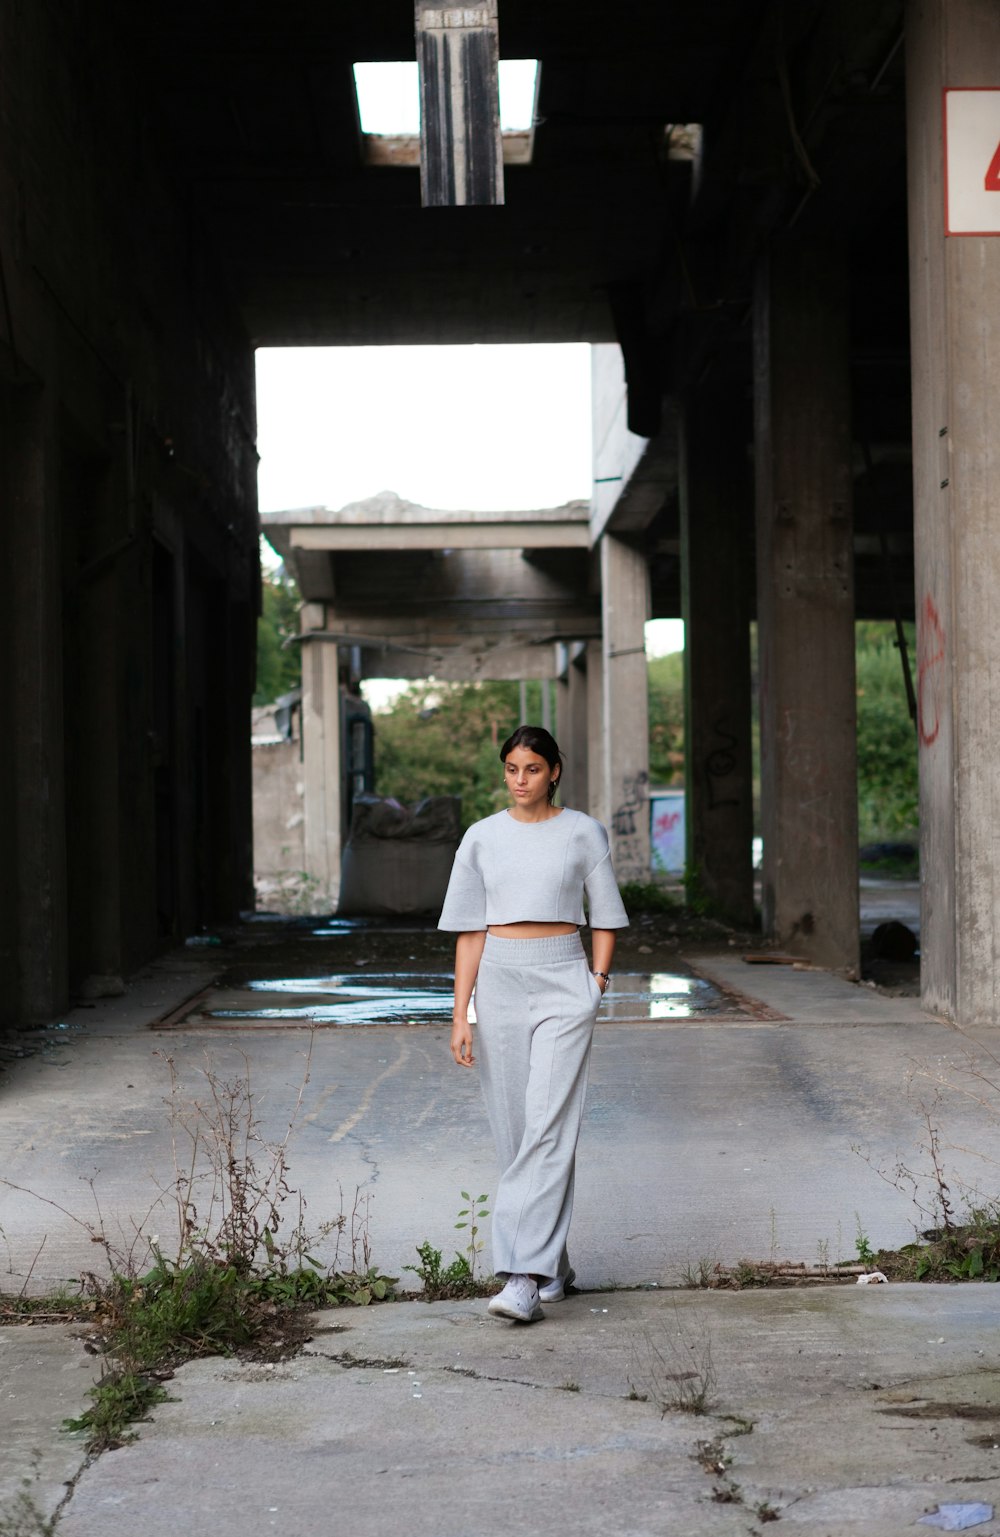 woman in white long sleeve shirt and gray pants standing on gray concrete floor